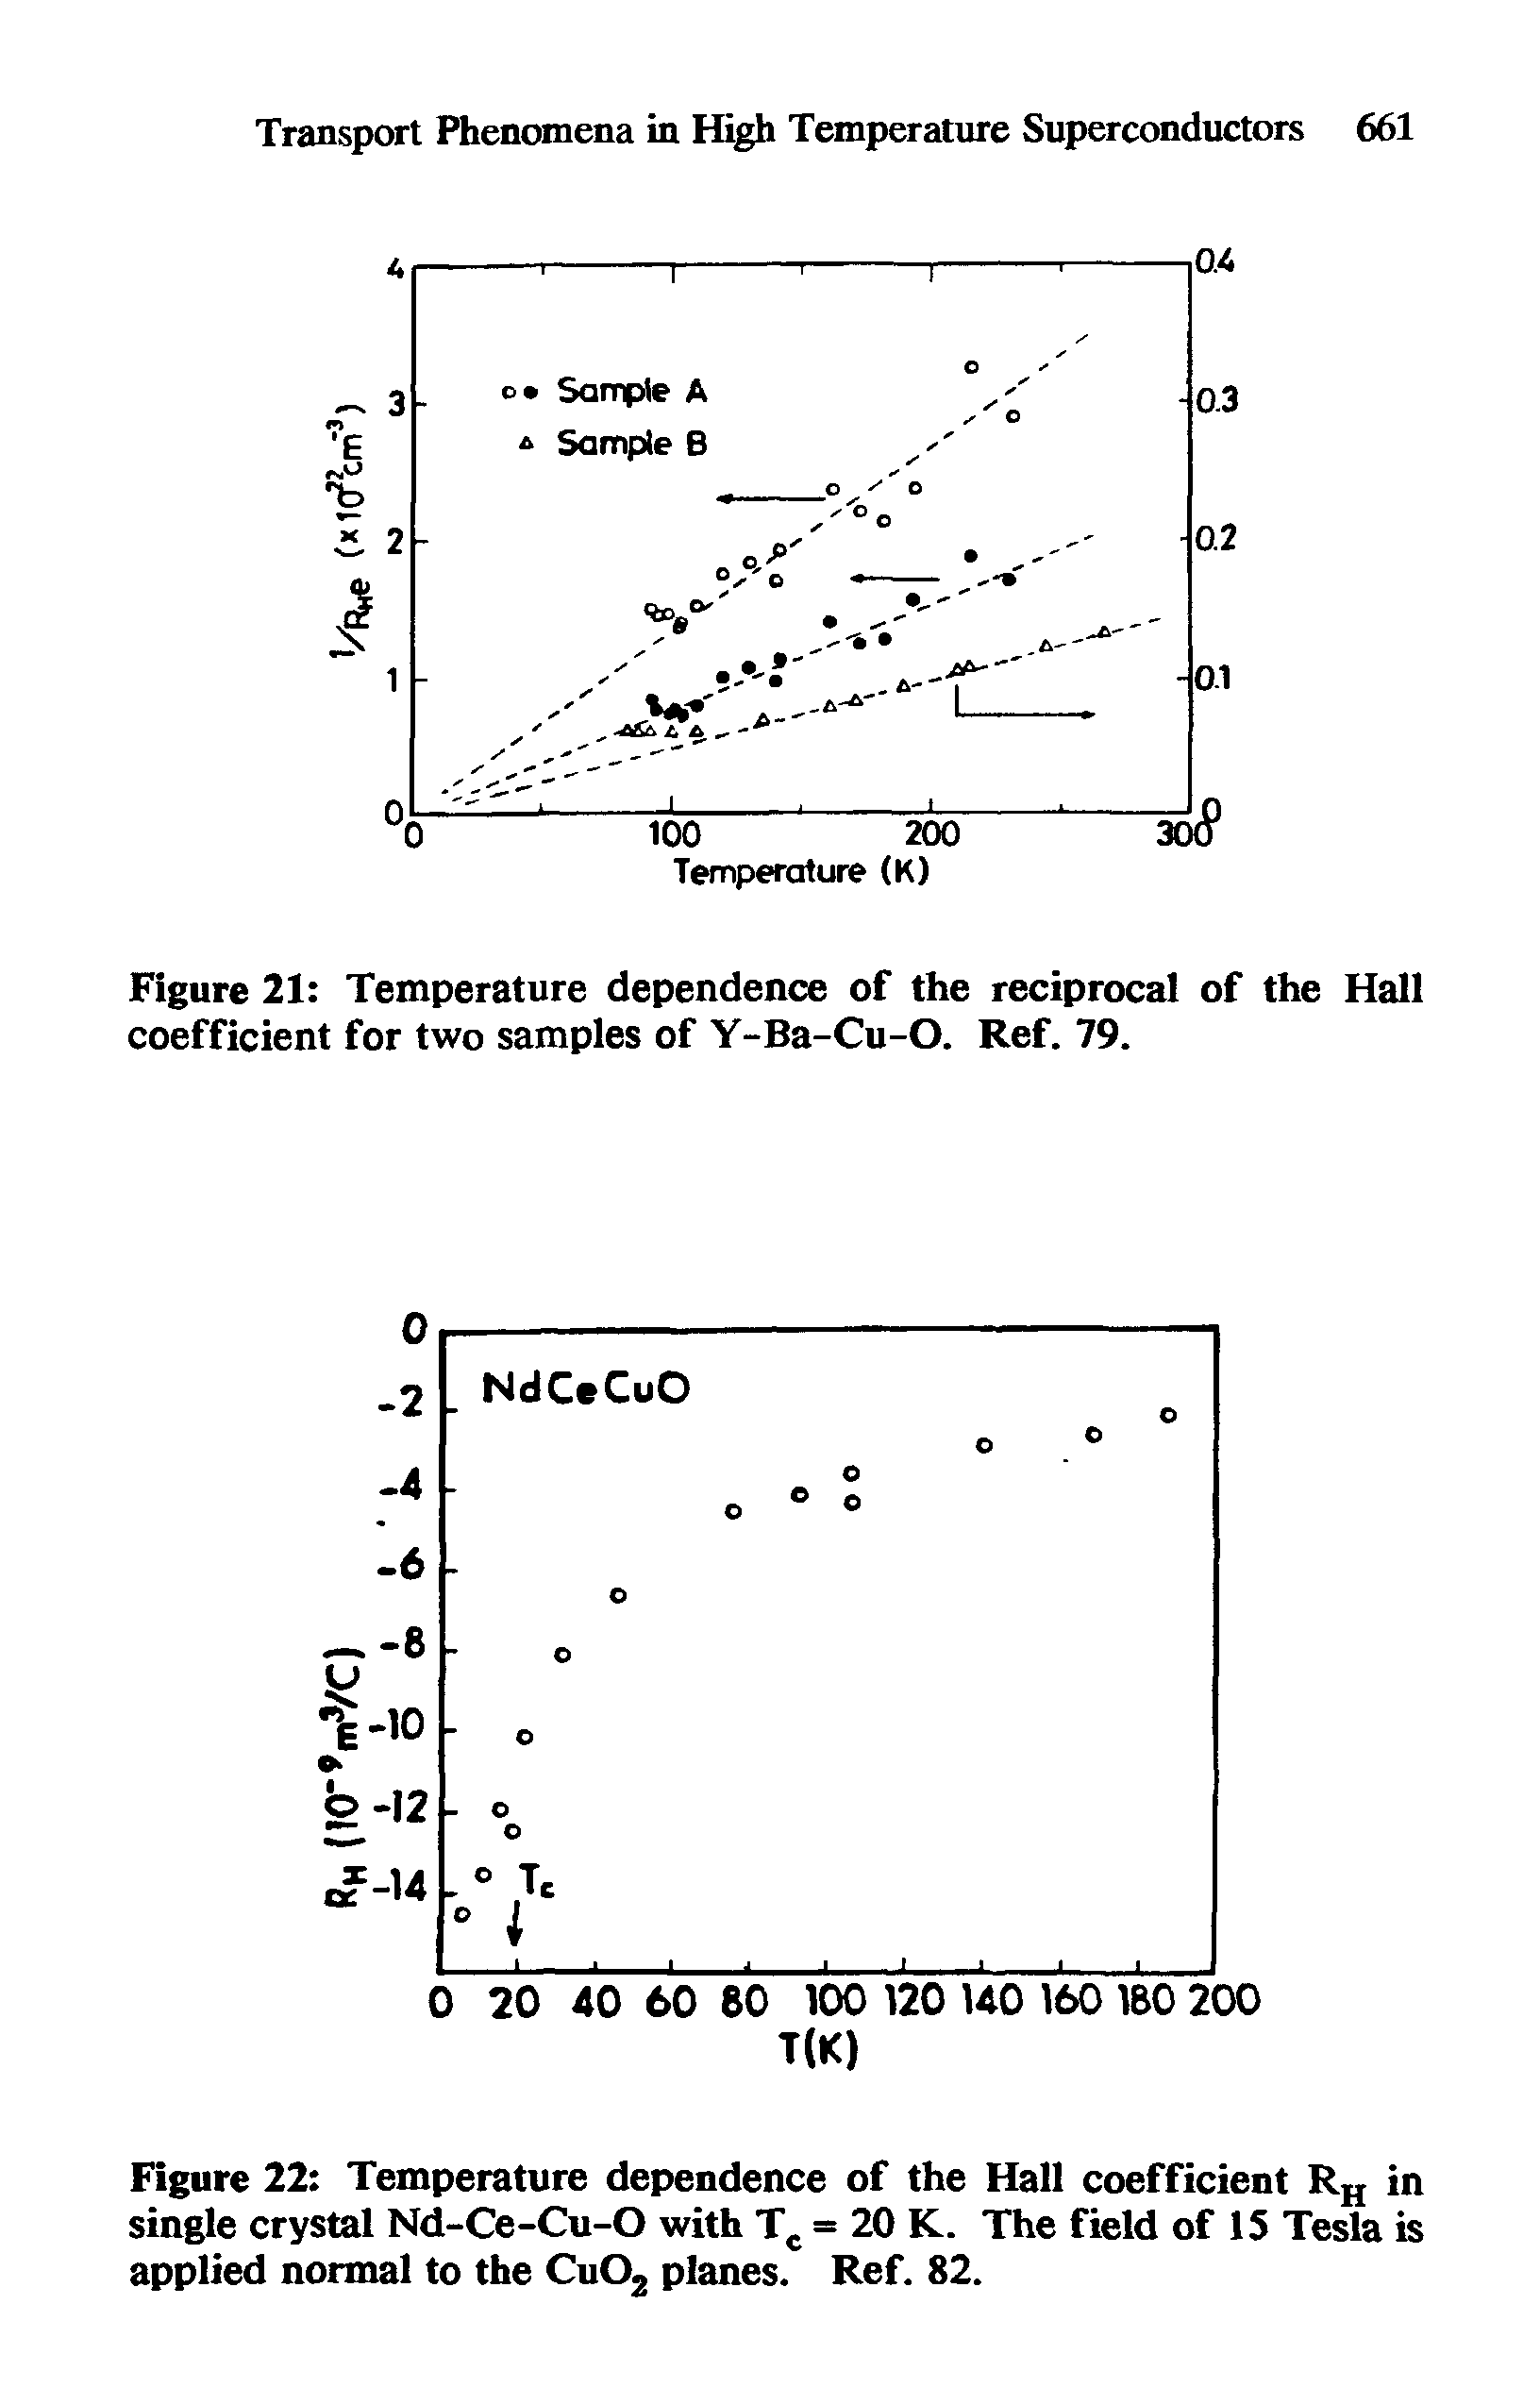 Figure 21 Temperature dependence of the reciprocal of the Hall coefficient for two samples of Y-Ba-Cu-O. Ref. 79.